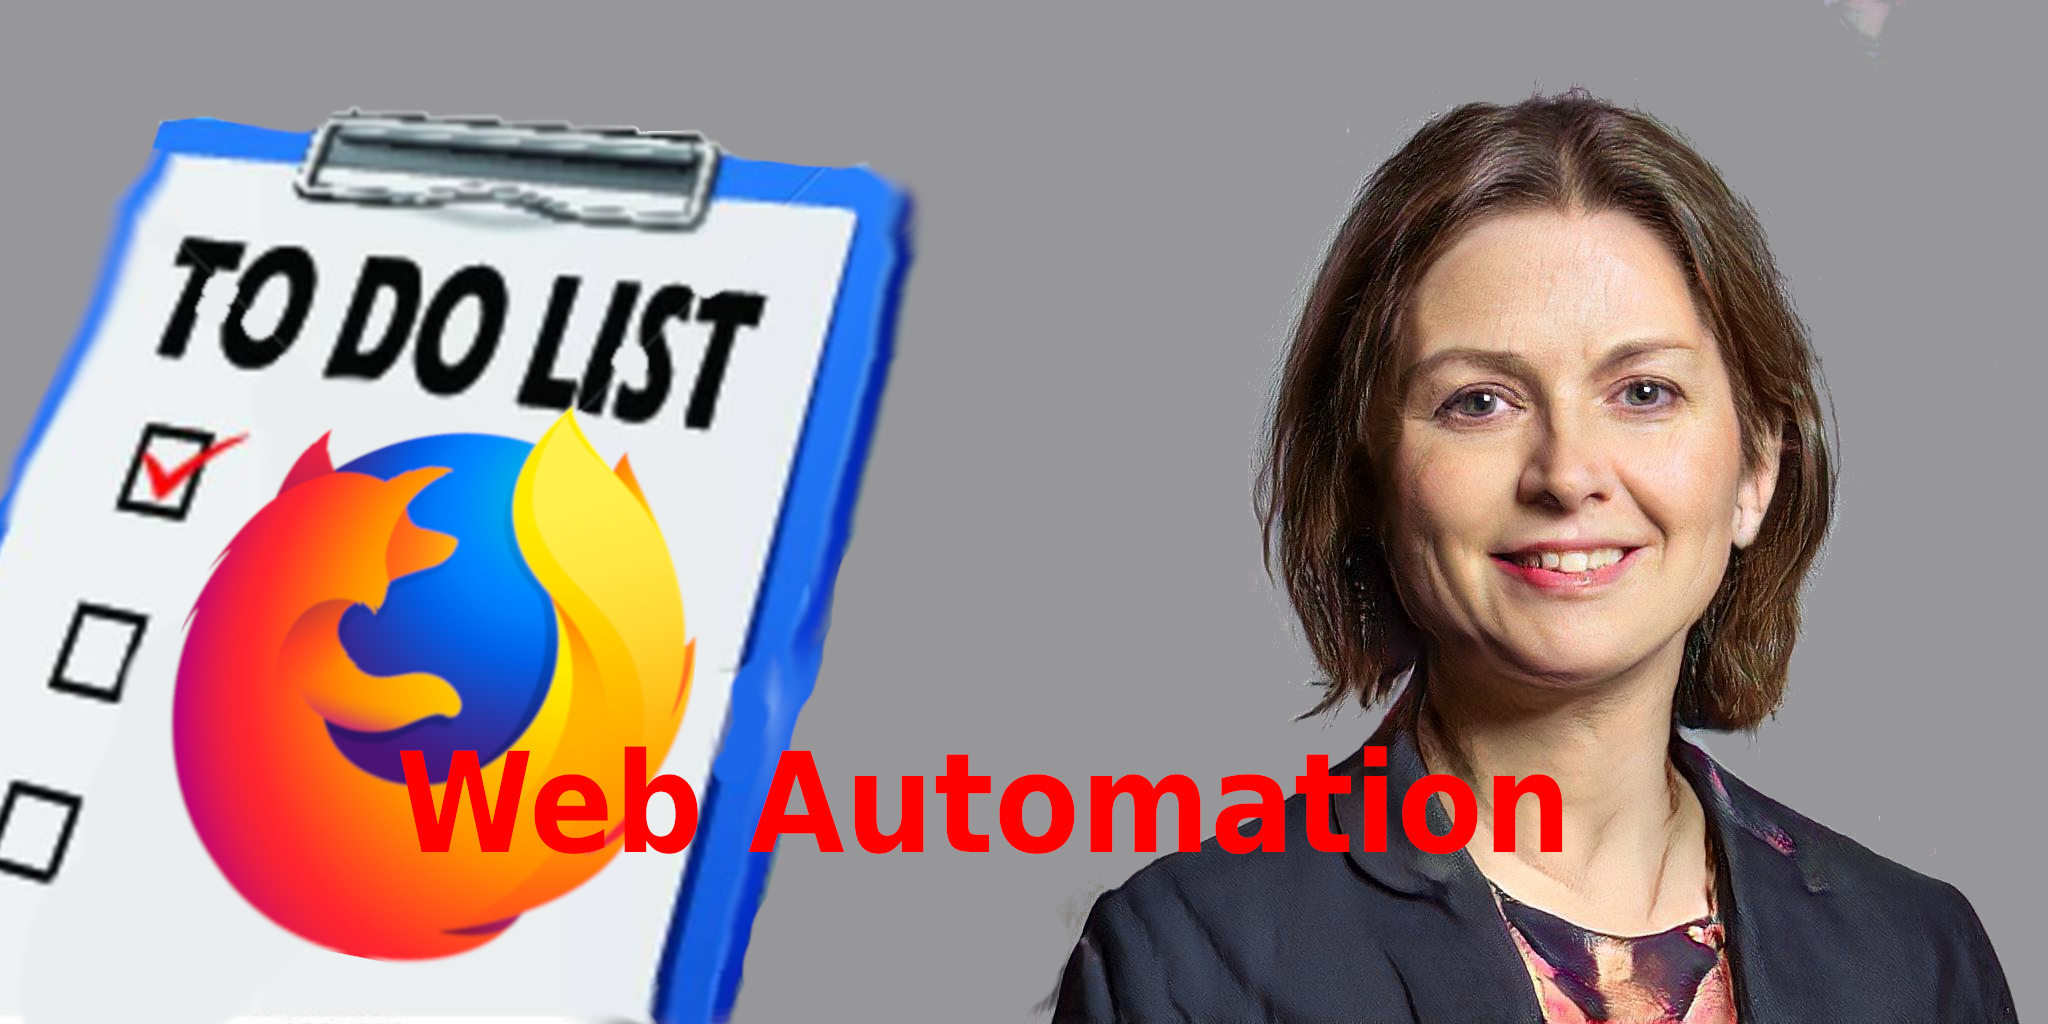 Automate any Web Browser Task 50 times!